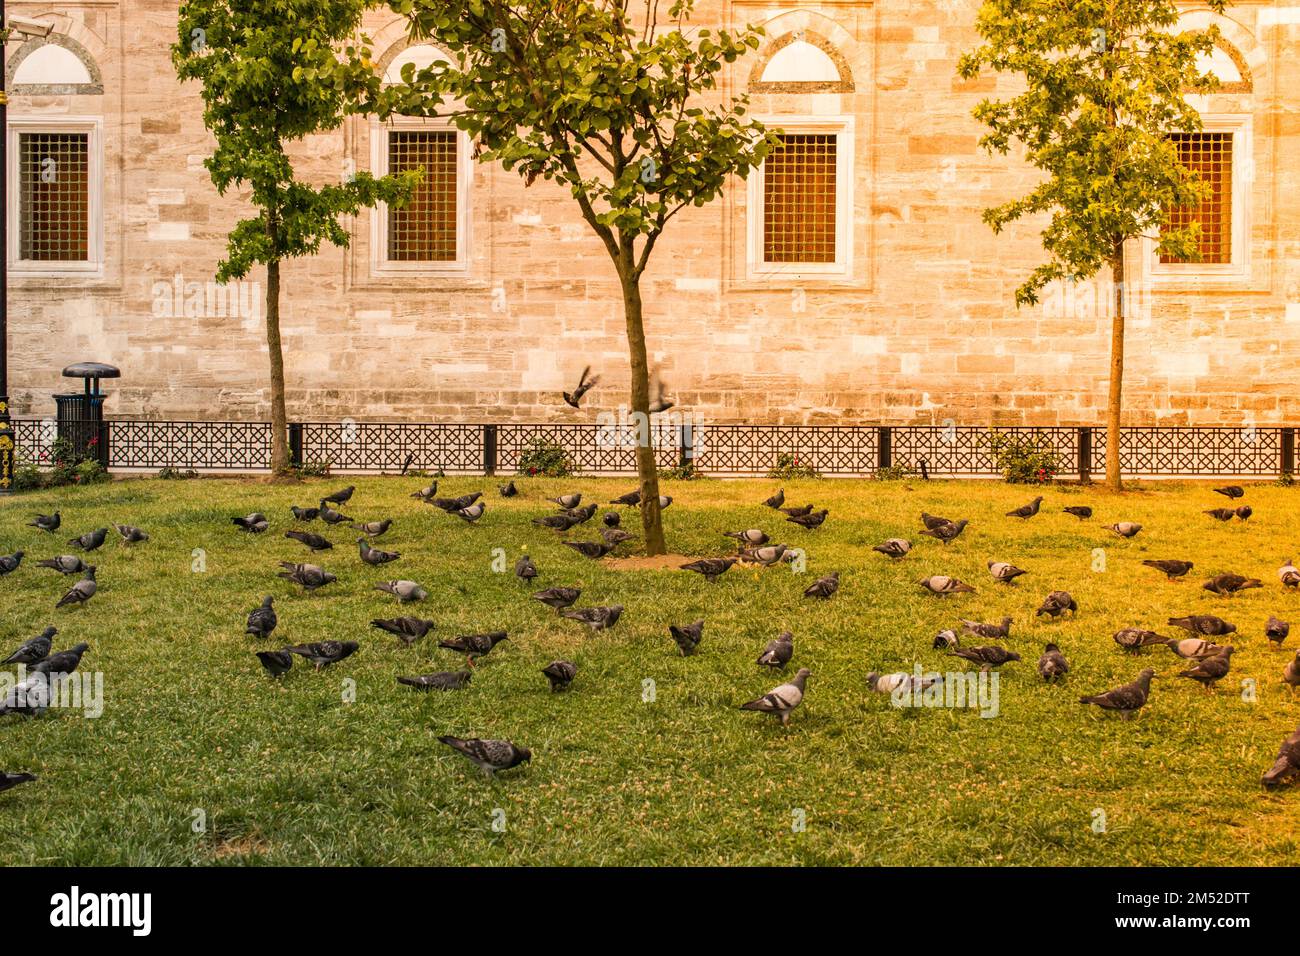 Pigeons in a park on grass. Calm, tranquil scene Stock Photo